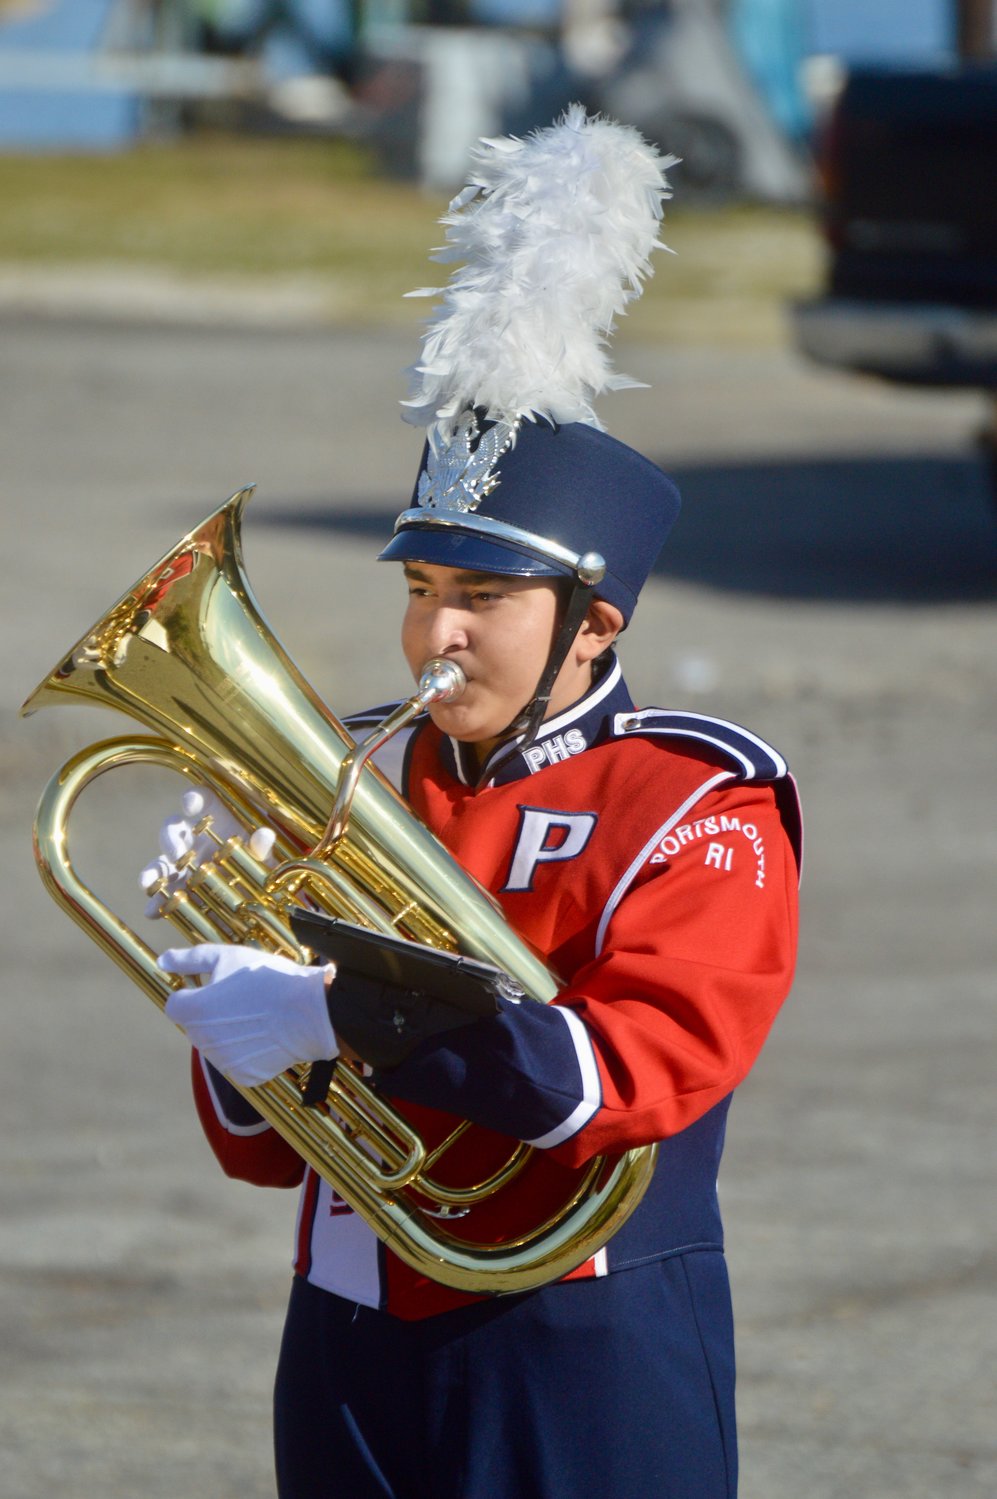 A member of the PHS Marching Band warms up near Stone Bridge before the short Veterans Day parade.